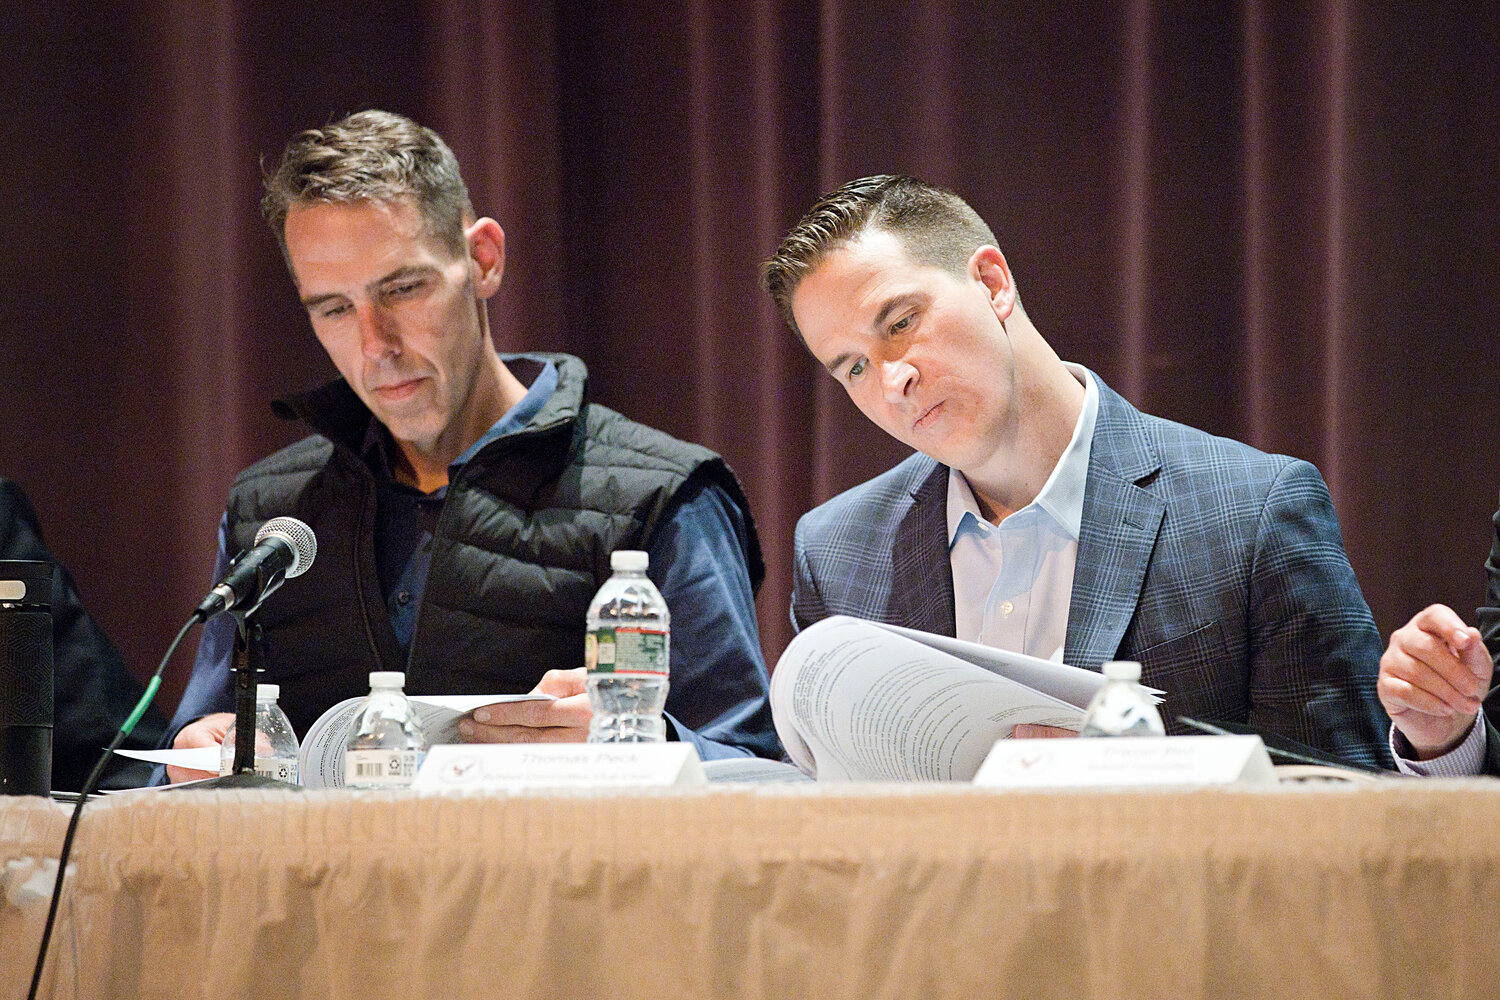 Barrington School Committee members Patrick McCrann (left) and TJ Peck read through the paperwork at Wednesday night's FTM.